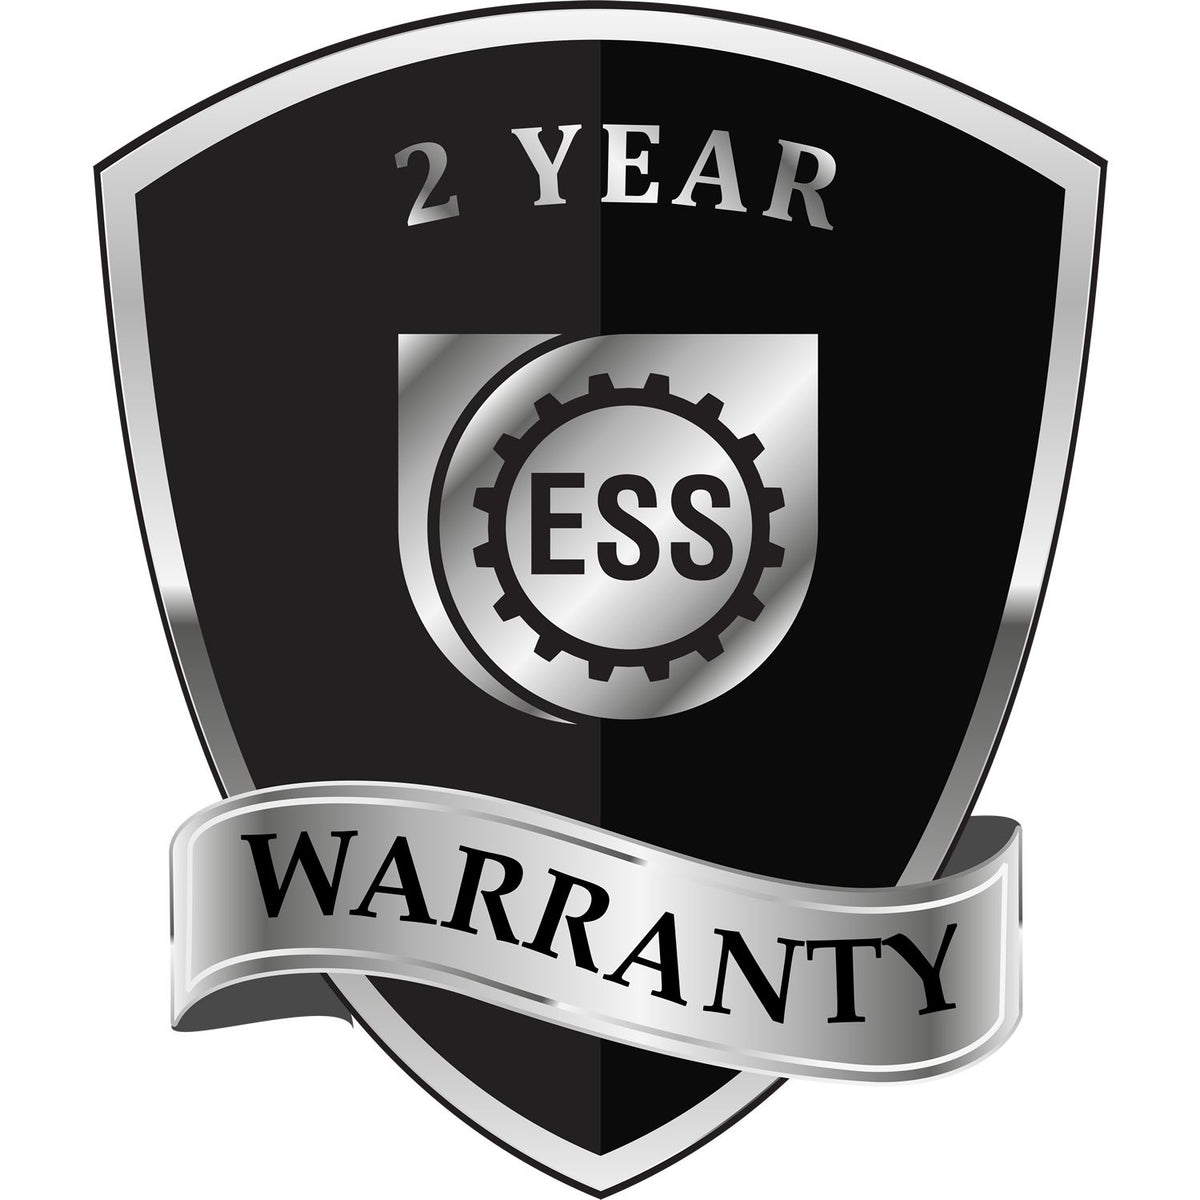 A badge or emblem showing a warranty icon for the State of Michigan Architectural Seal Embosser